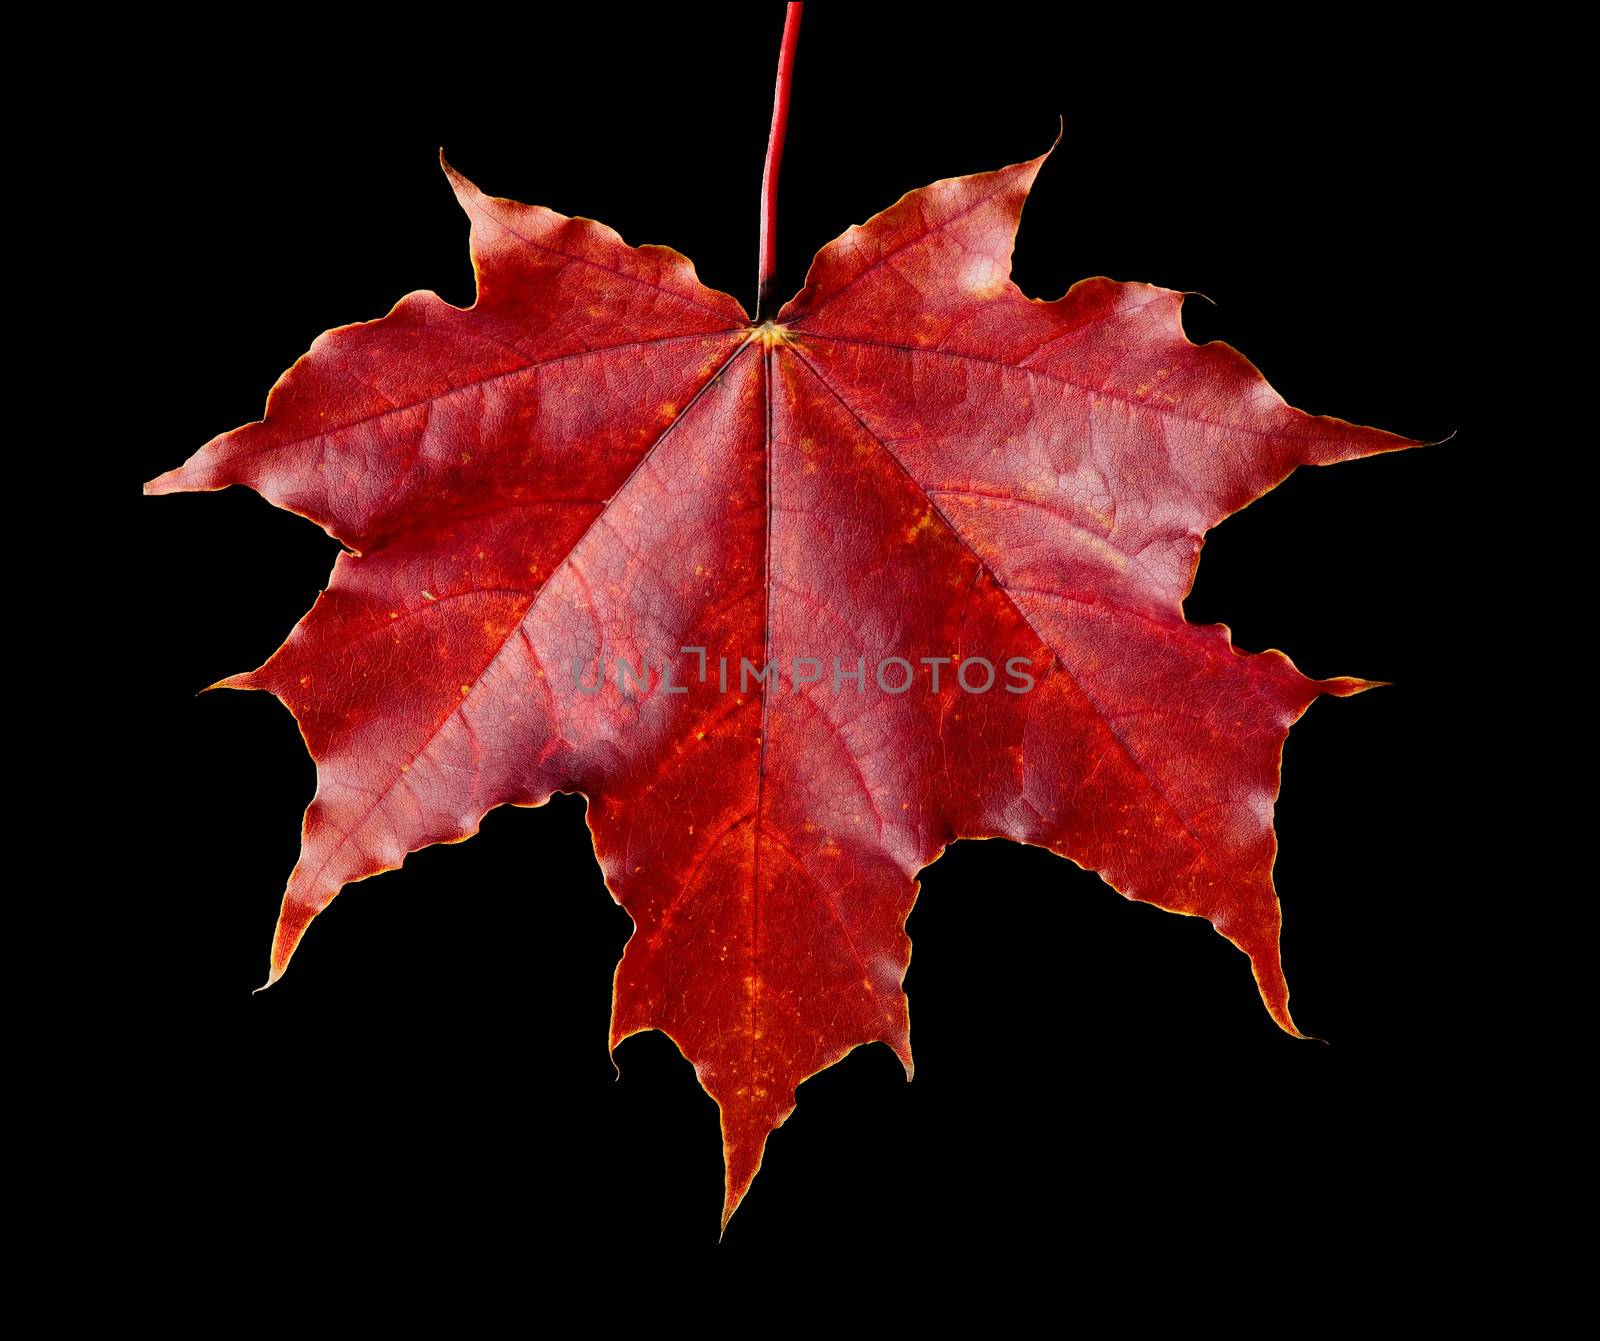 Fallen in the autumn from a tree a red maple leaf